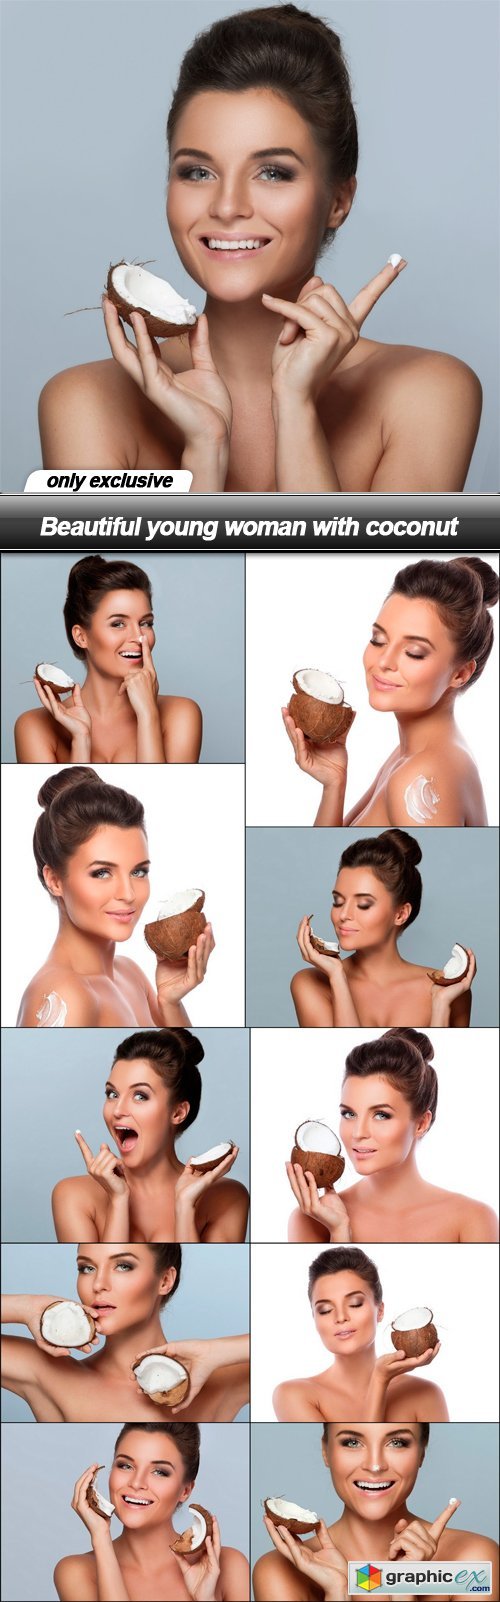 Beautiful young woman with coconut - 11 UHQ JPEG